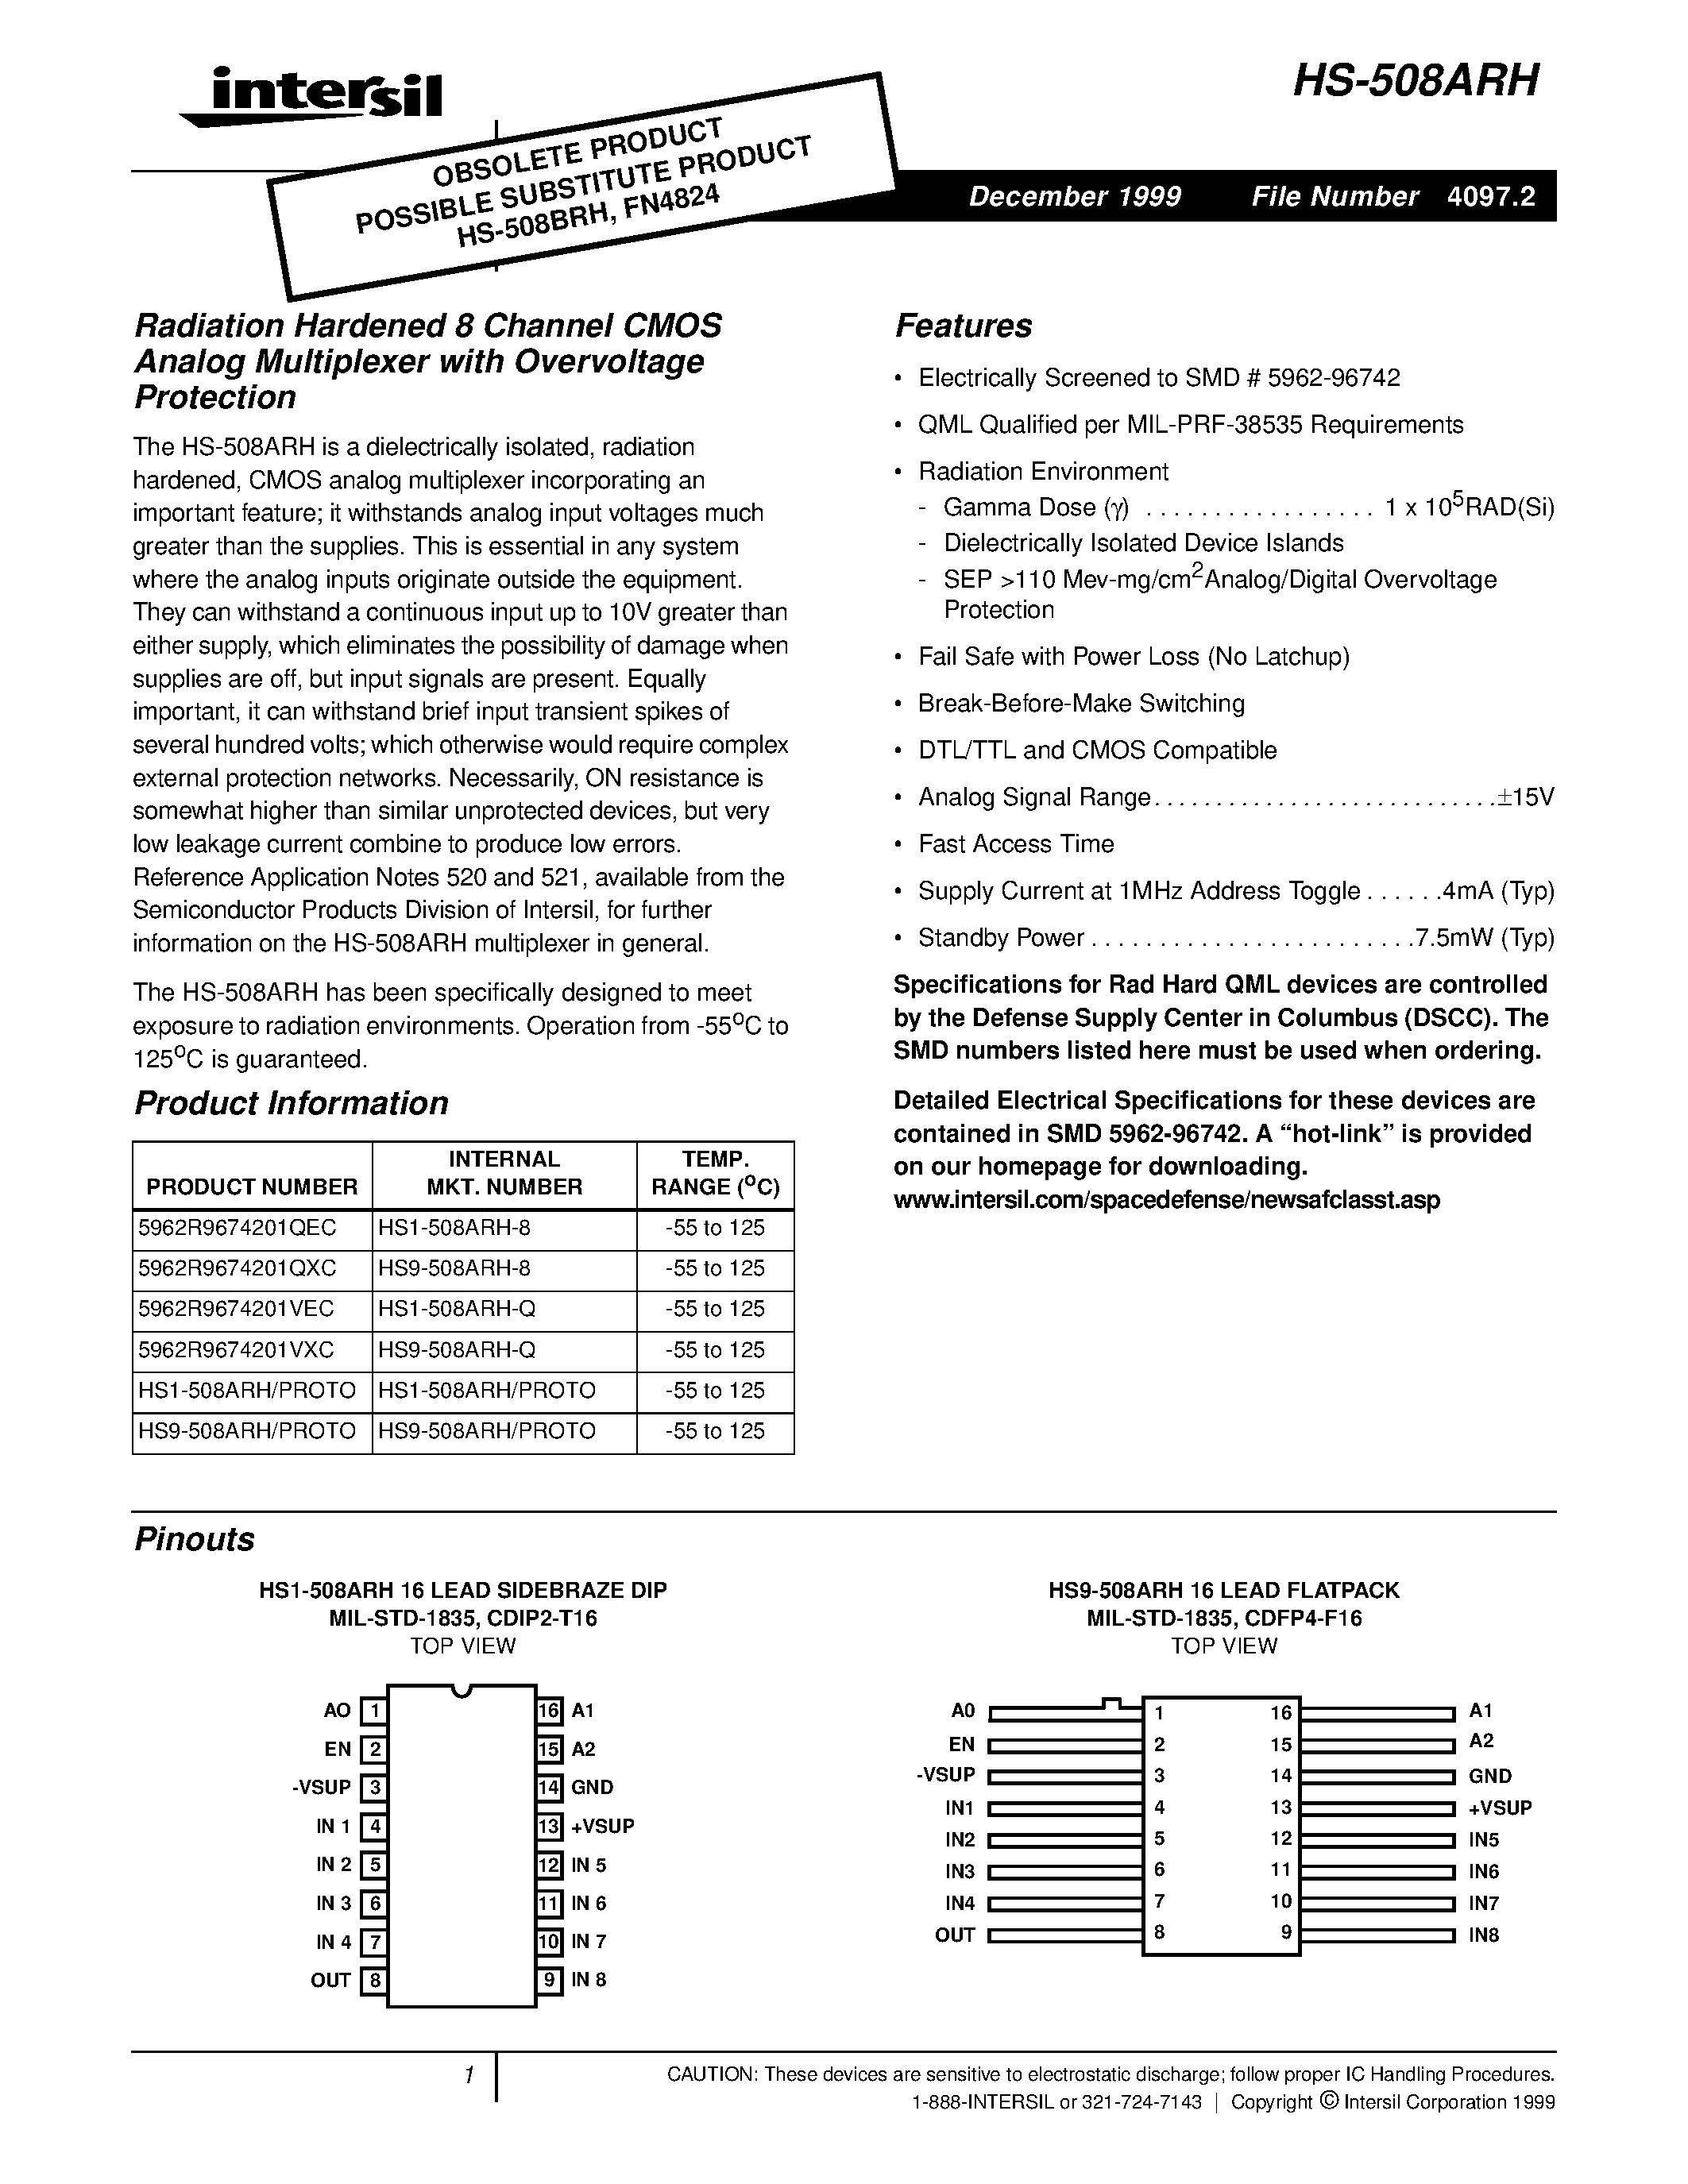 Datasheet HS1-508ARH-Q - Radiation Hardened 8 Channel CMOS Analog Multiplexer with Overvoltage Protection page 1